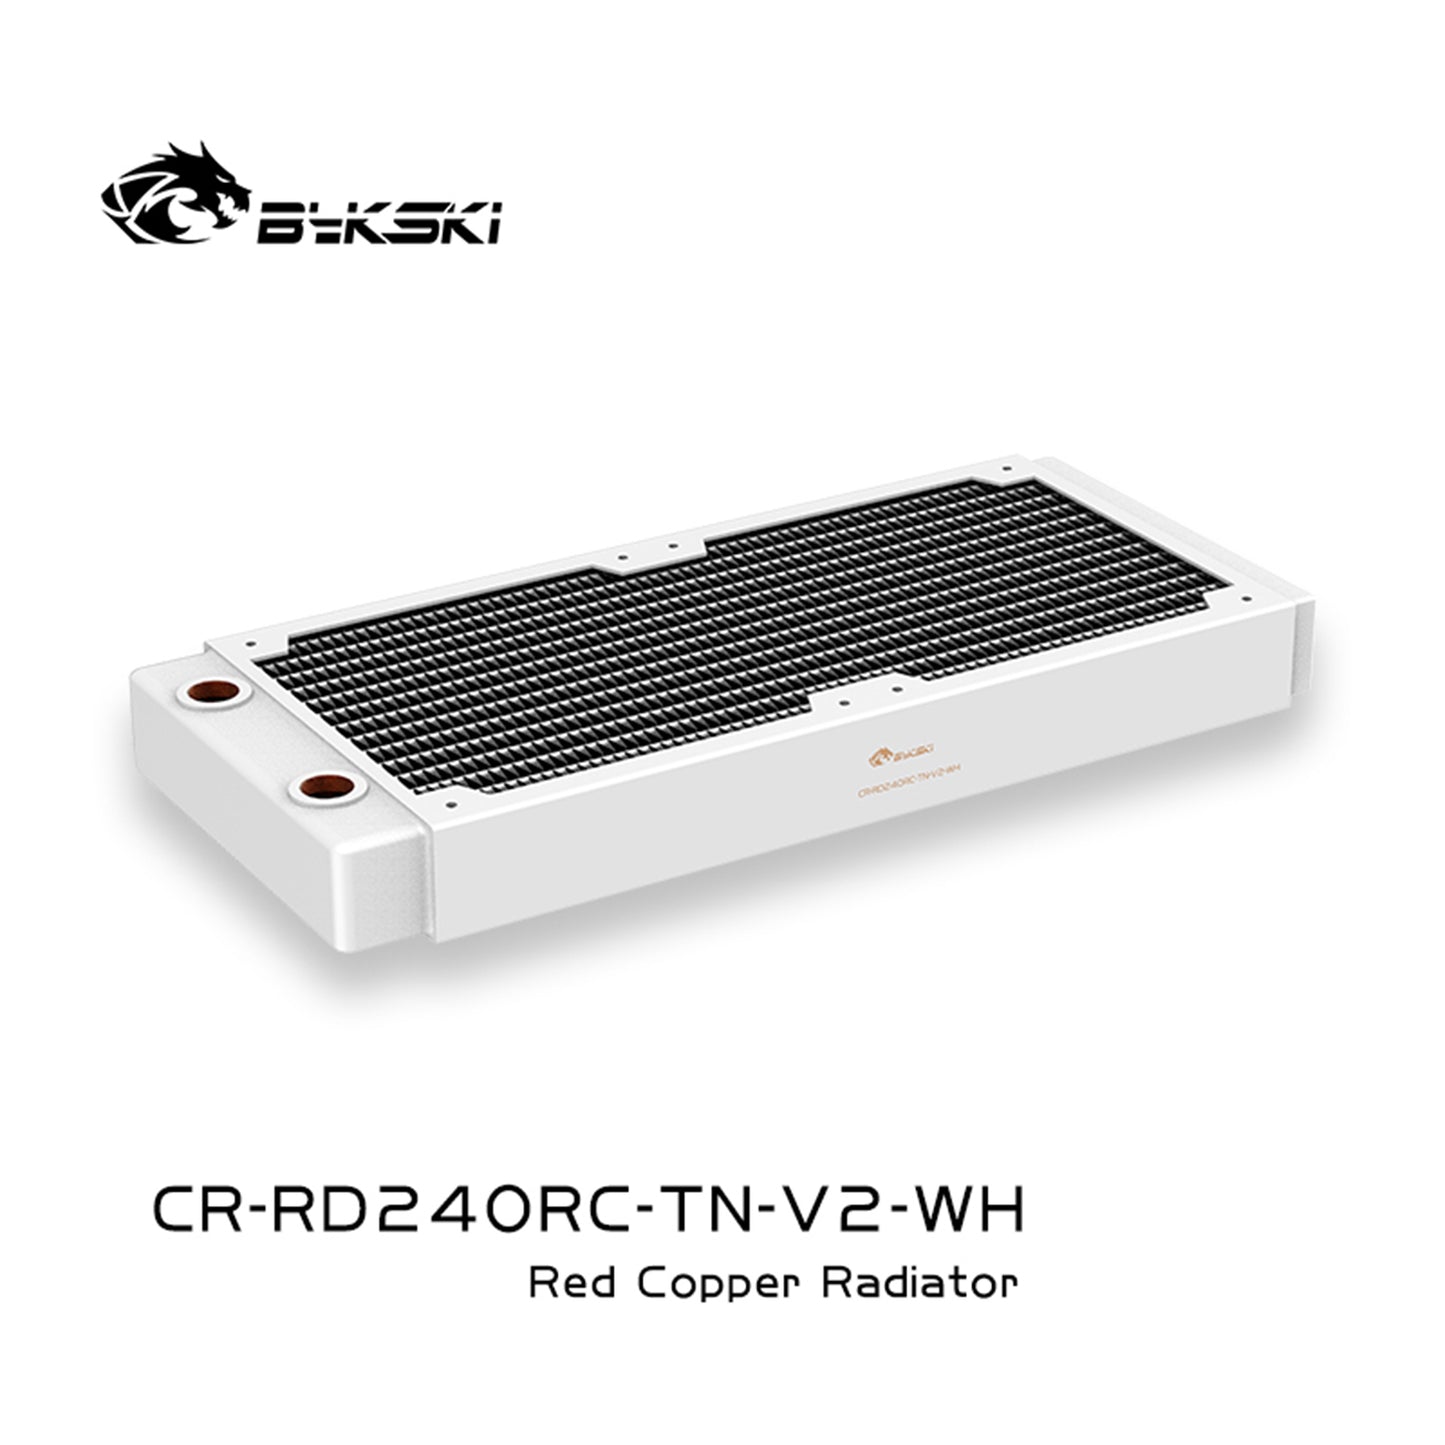 Bykski 240mm Copper Radiator RC Series High-performance Heat Dissipation 30mm Thickness for 12cm Fan Cooler, CR-RD240RC-TN-V2